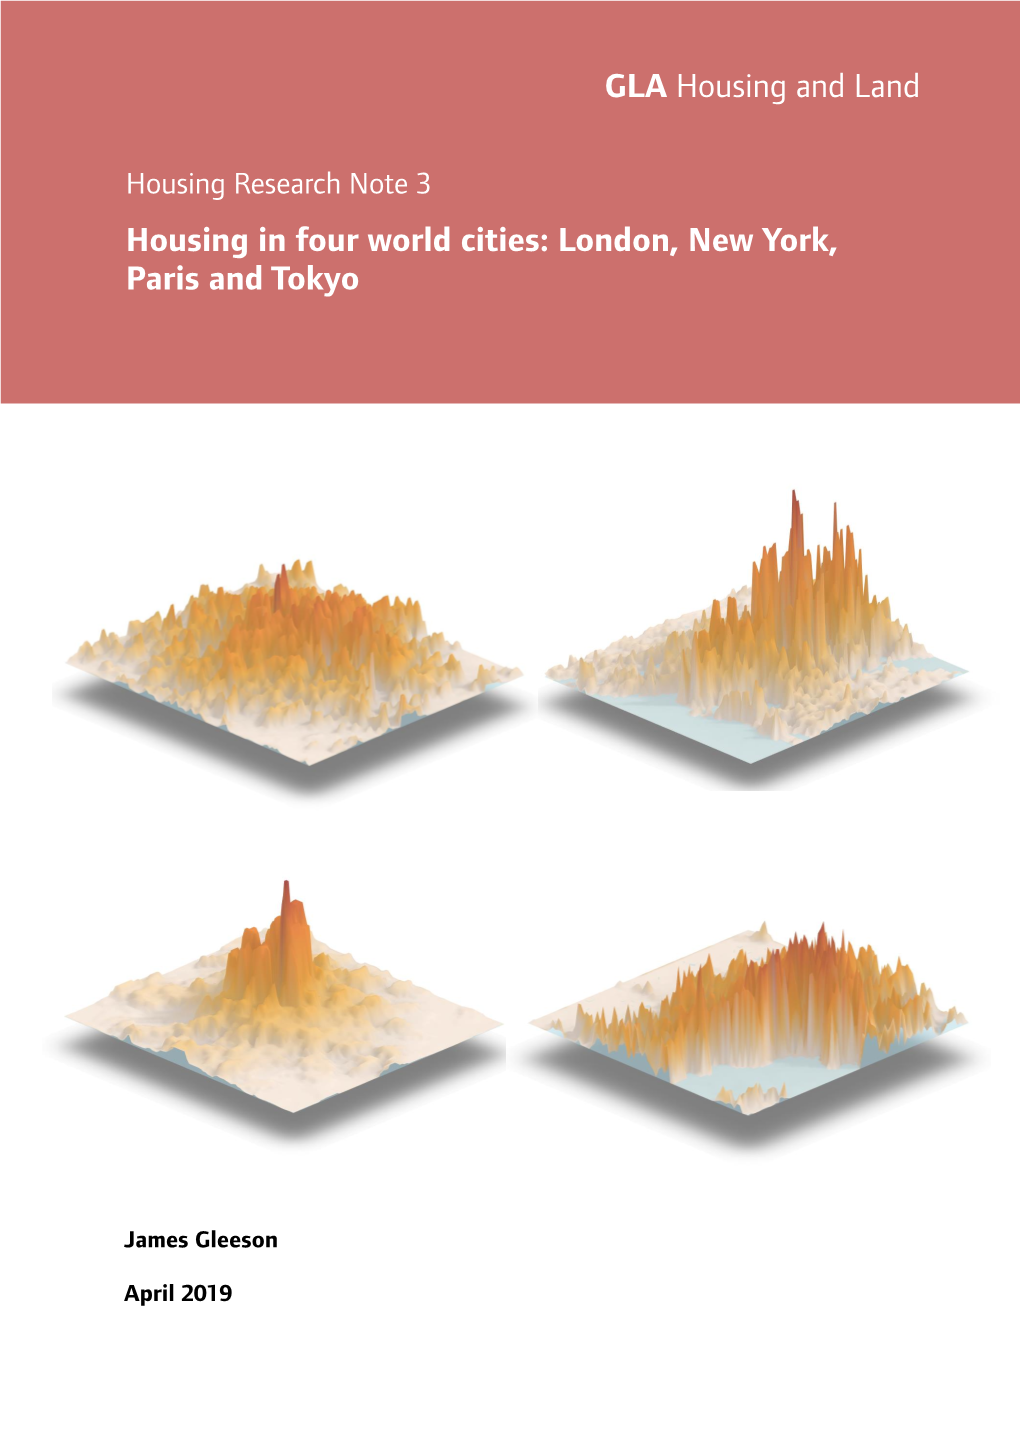 Housing in Four World Cities: London, New York, Paris and Tokyo